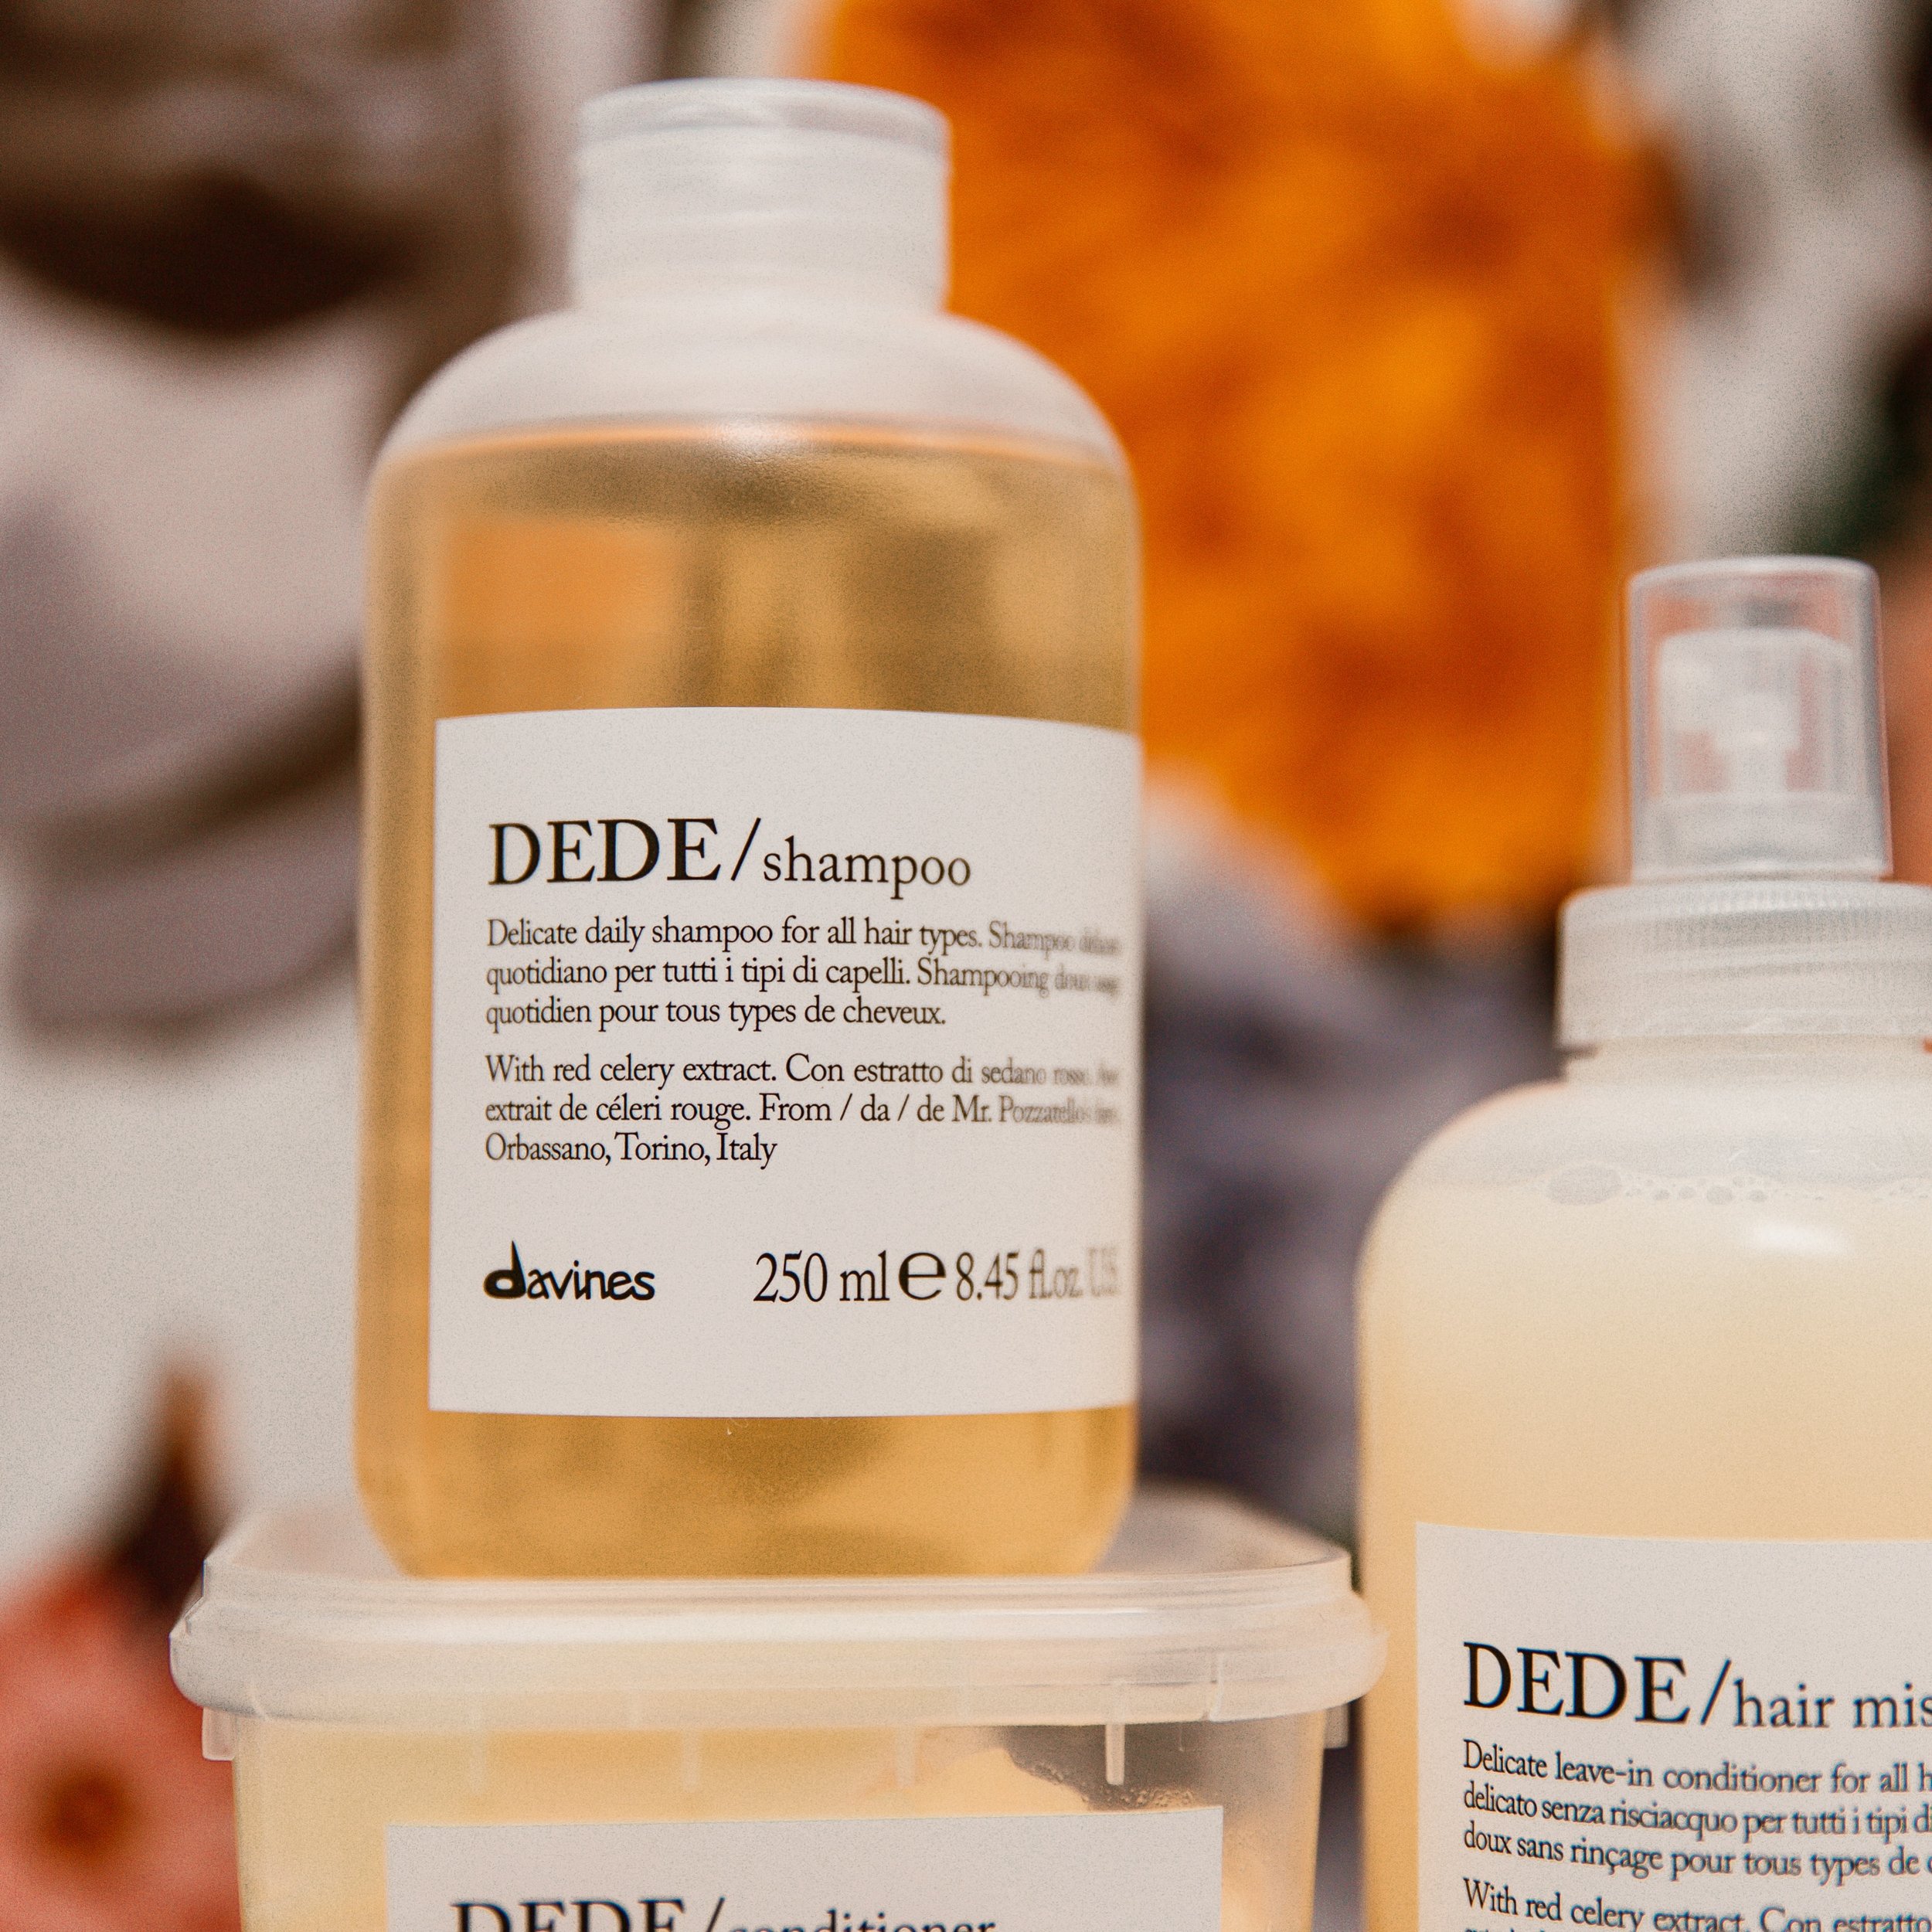 This humidity calls for a lightweight shampoo. 💧The Davines Dede Line is a collection of hair care products designed to gently cleanse and nourish all hair types. Formulated with ingredients such as red celery extract from Torino, Italy, the Dede Li